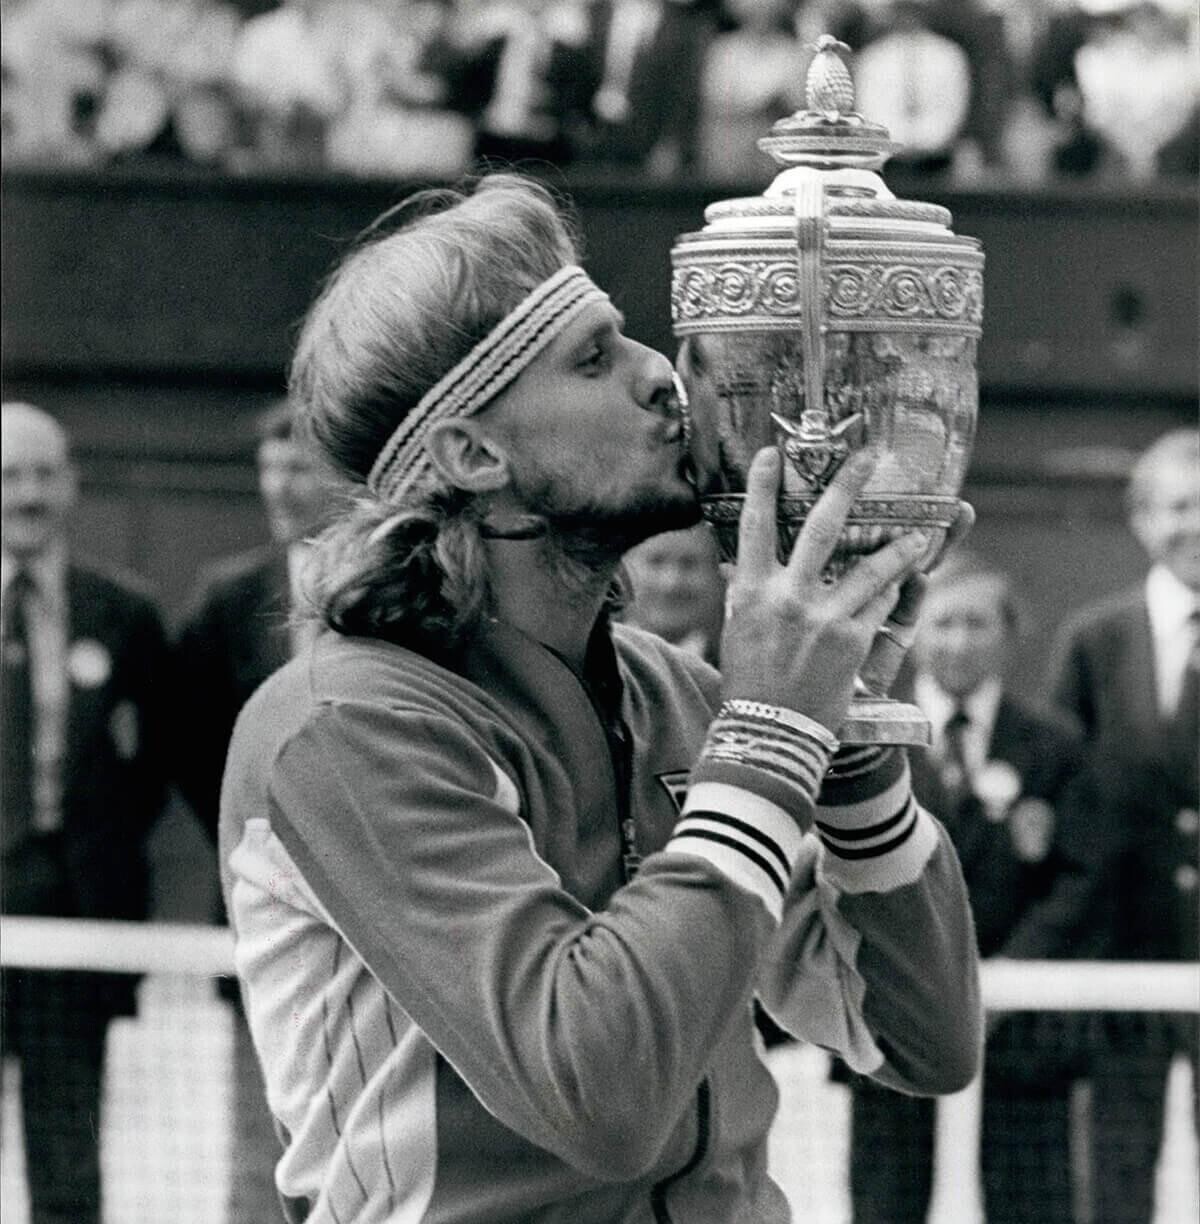 Jul. 07, 1979 - Bjorn Borg Wins his fourth Successive Wimbledon title beating Roscoe Tanner in Five sets: Today of the Centre Court at Wimbledon Bjorn Borg of Sweden won the Men's singles title for the fourth successive time when he beat American Roscoe Tanner in five sets. Photo shows Borg kissing the trophy after winning the men's singles title once again on the centre court at Wimbledon today.